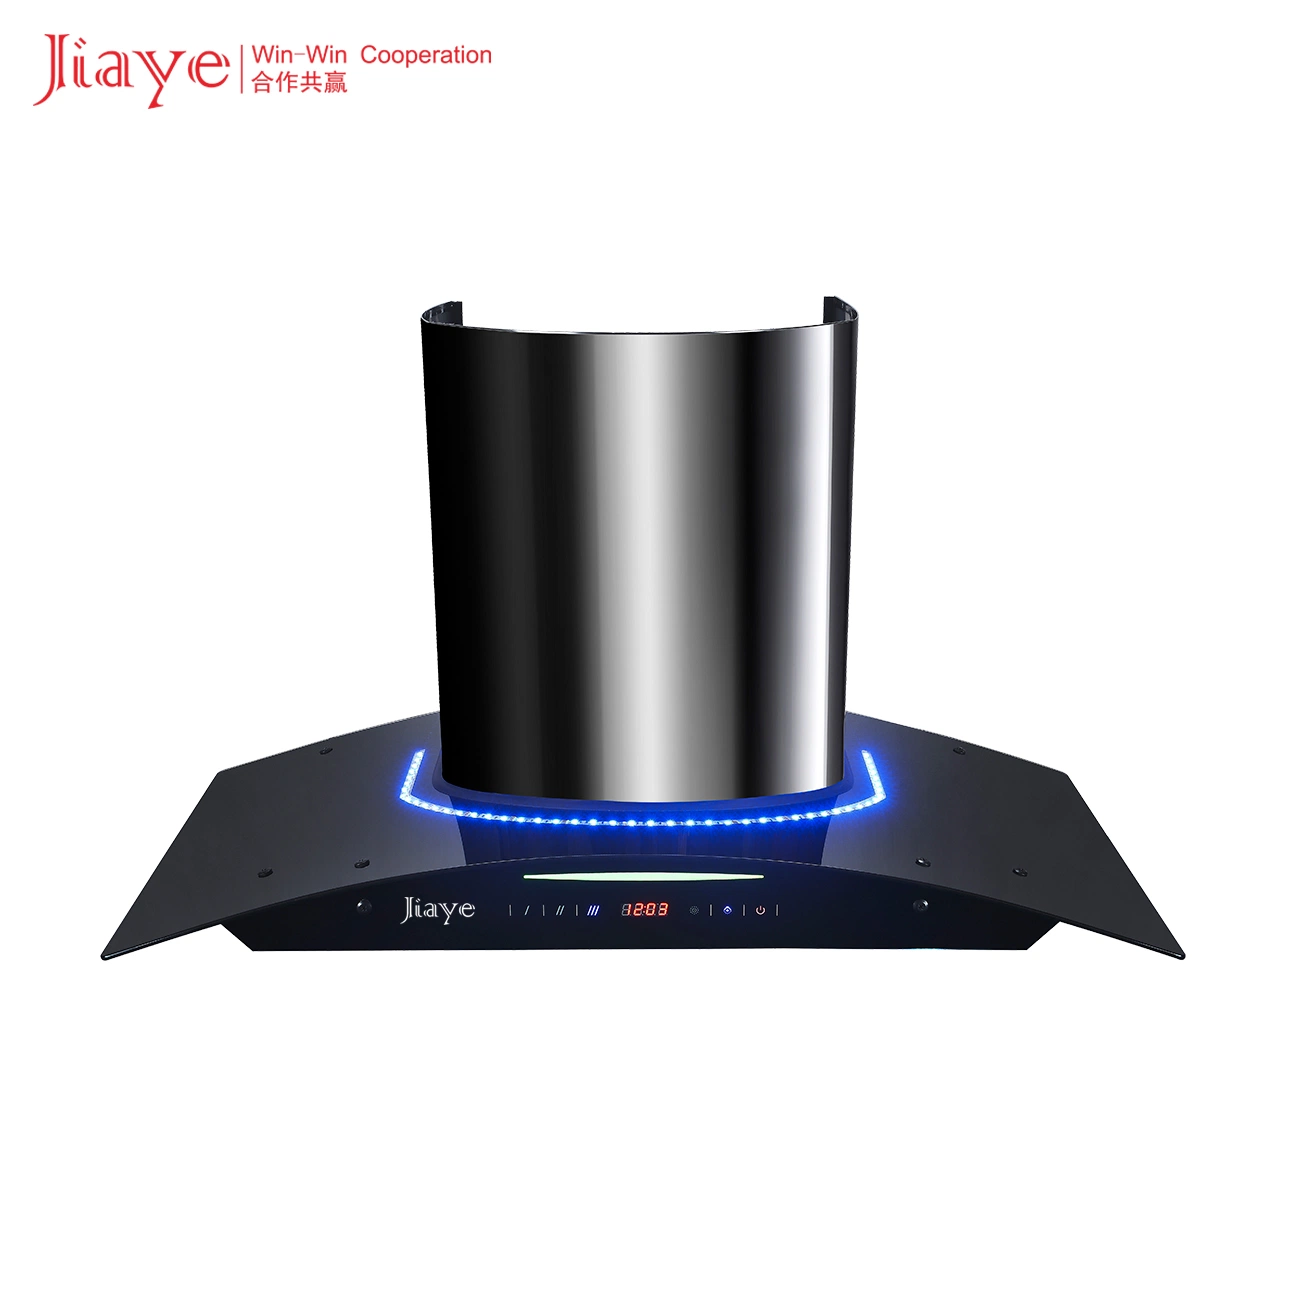 Touch Control 3 Speed Range Hood with LED Strings